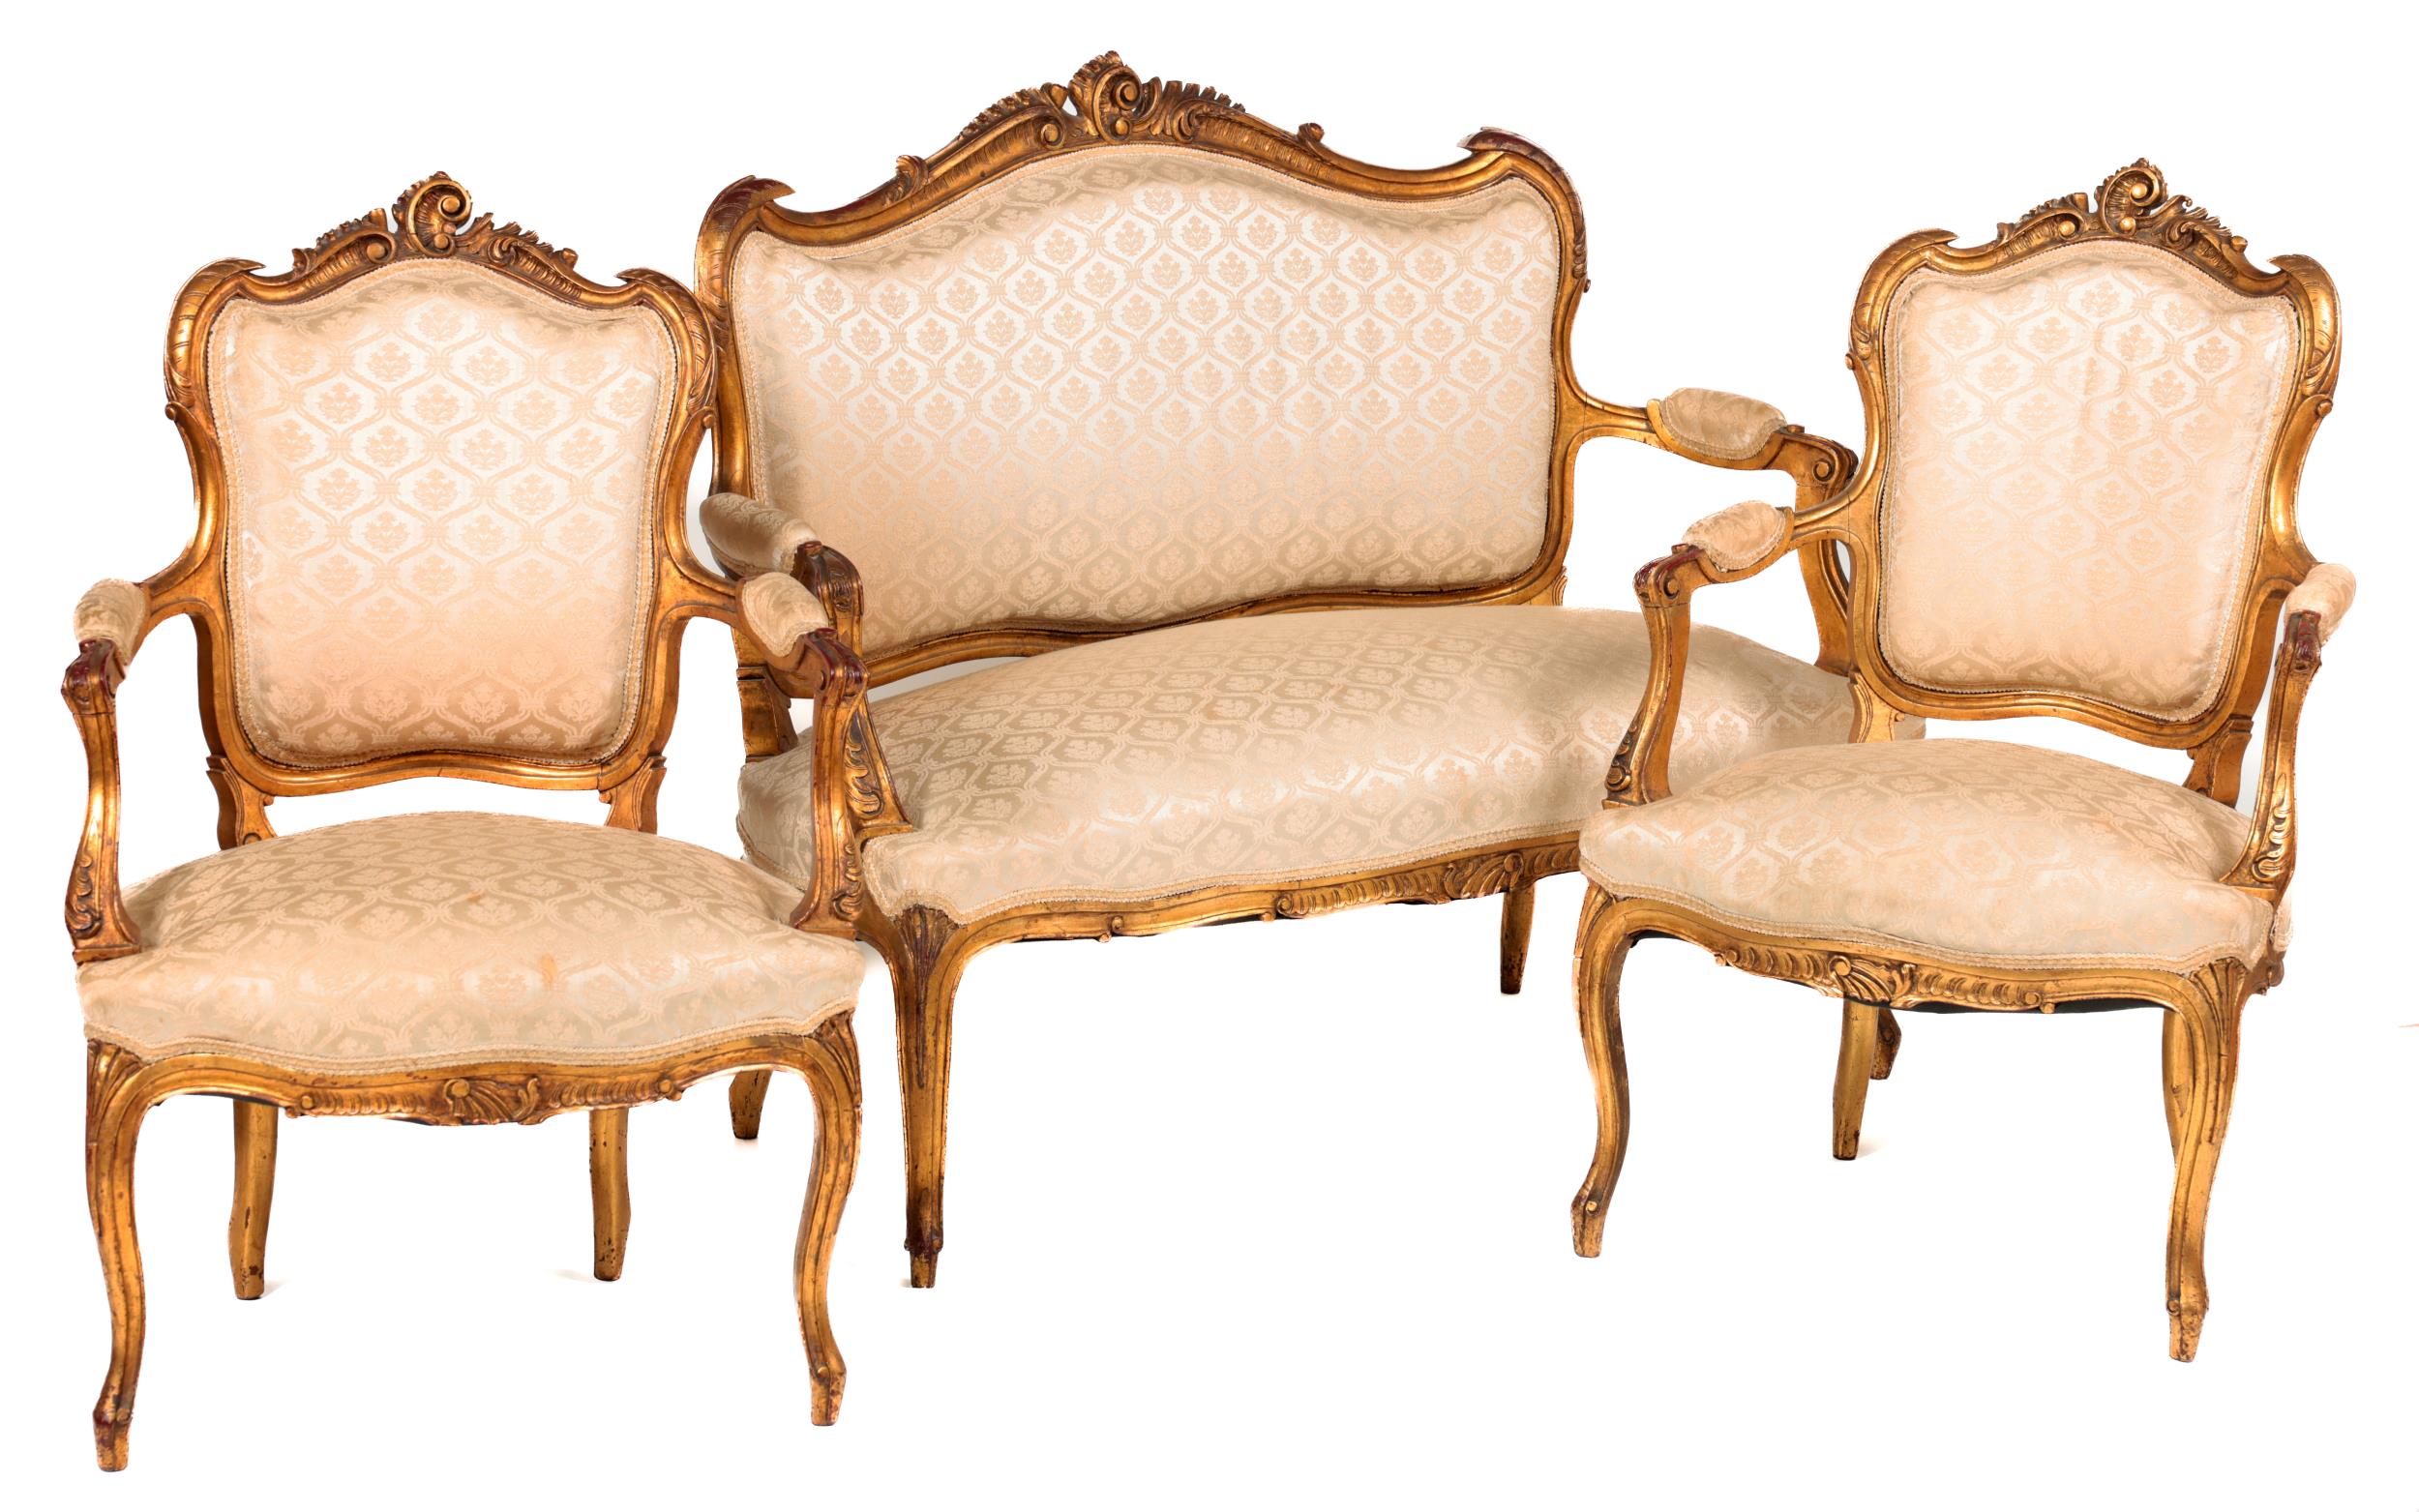 A French style five piece giltwood Parlour Suite, comprising a two seater Settee, a pair of